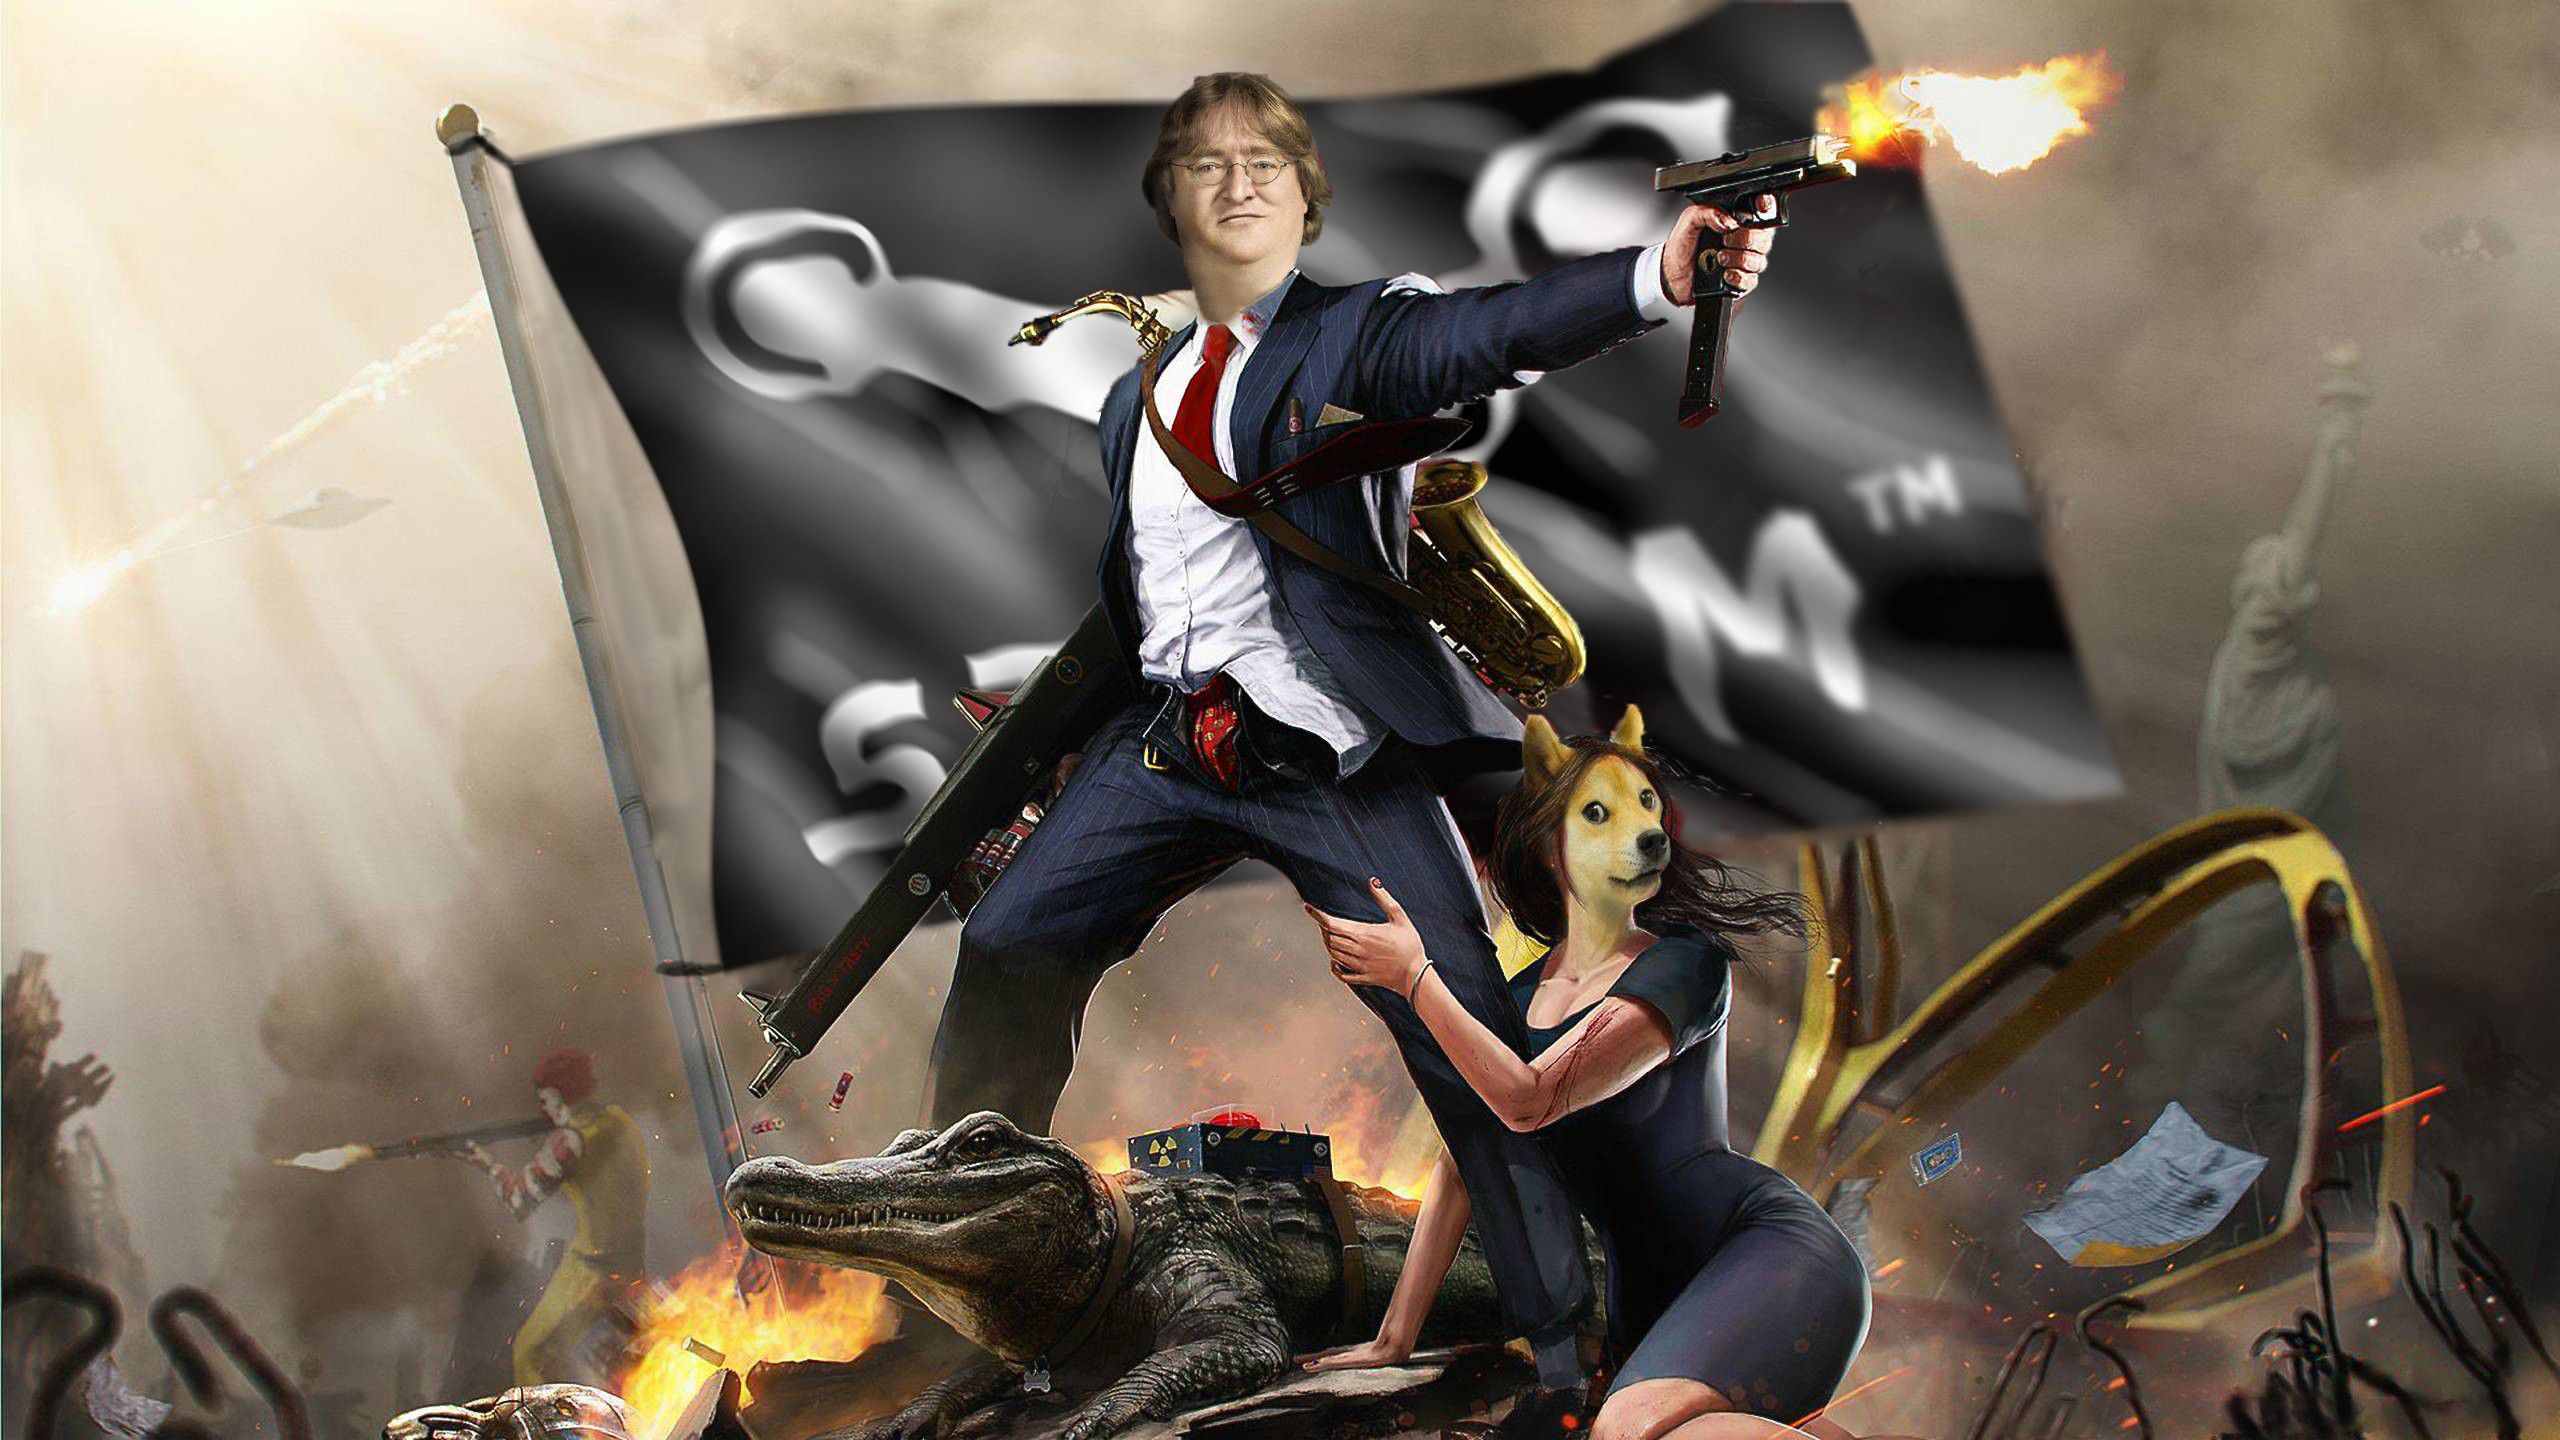 2560x1440 [Per Request] The GabeN Clinton wallpaper, with the steam flag ...